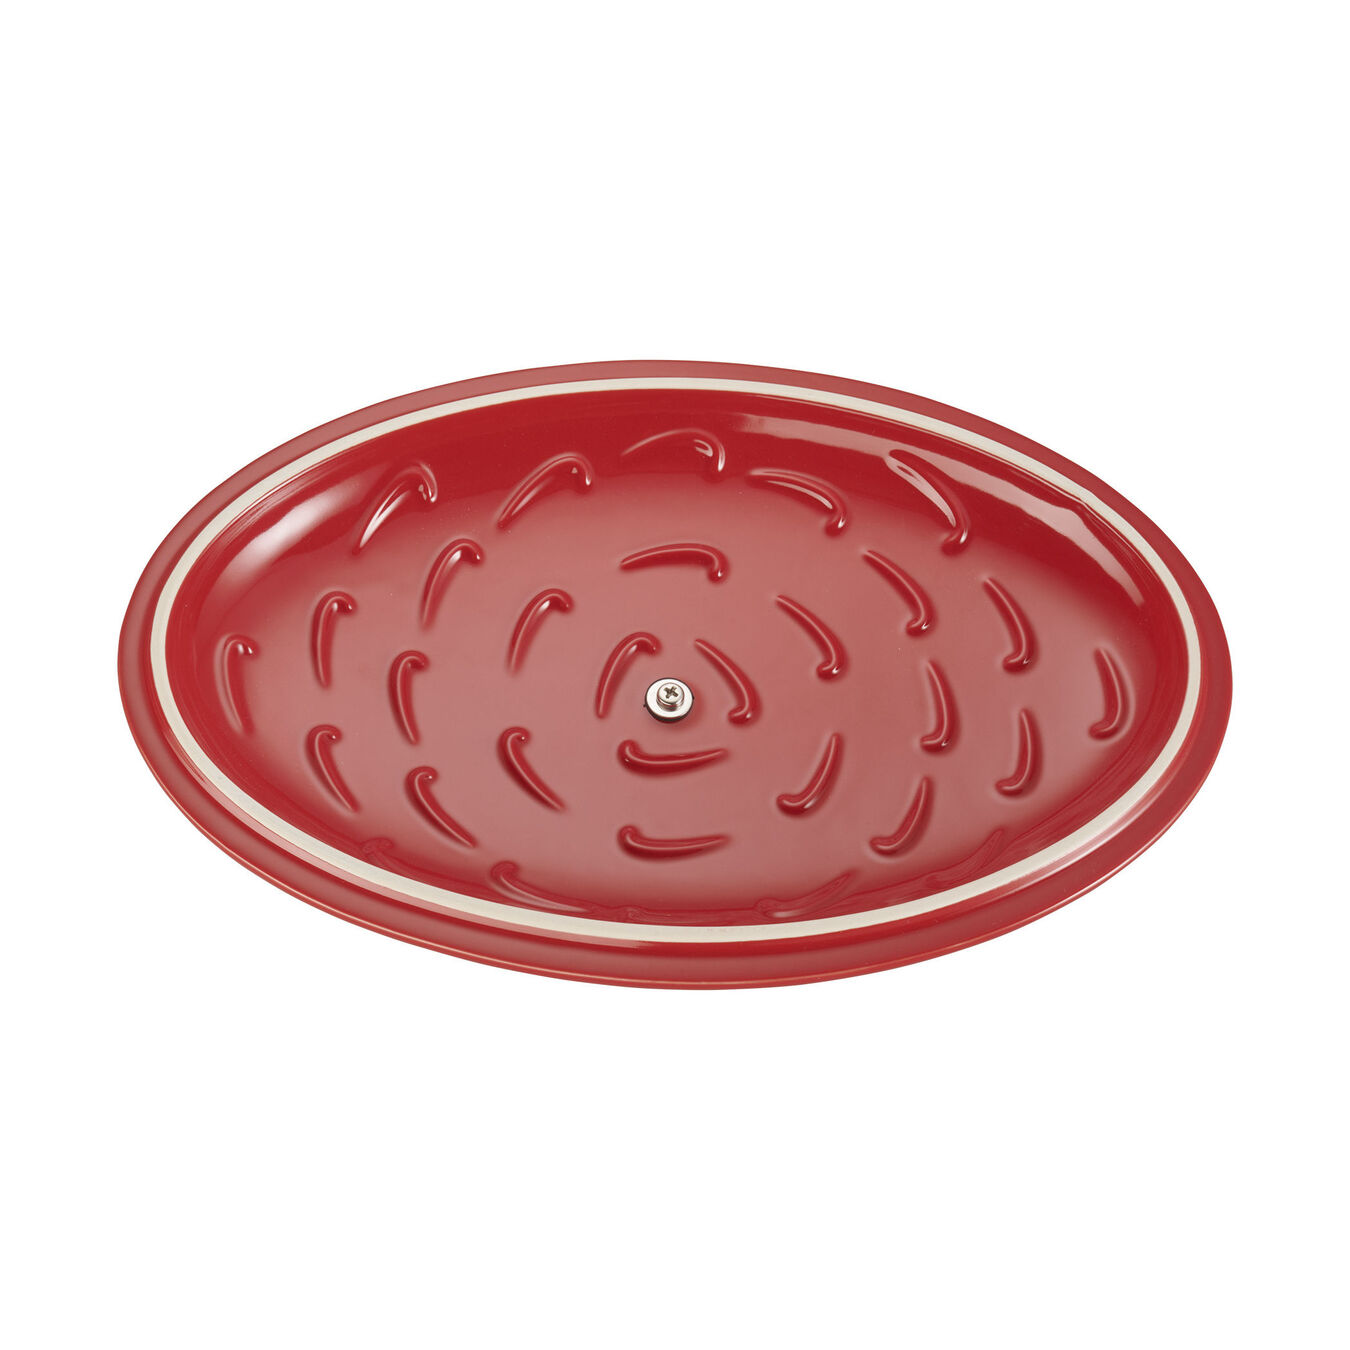  ceramic Special shape bakeware, cherry,,large 5